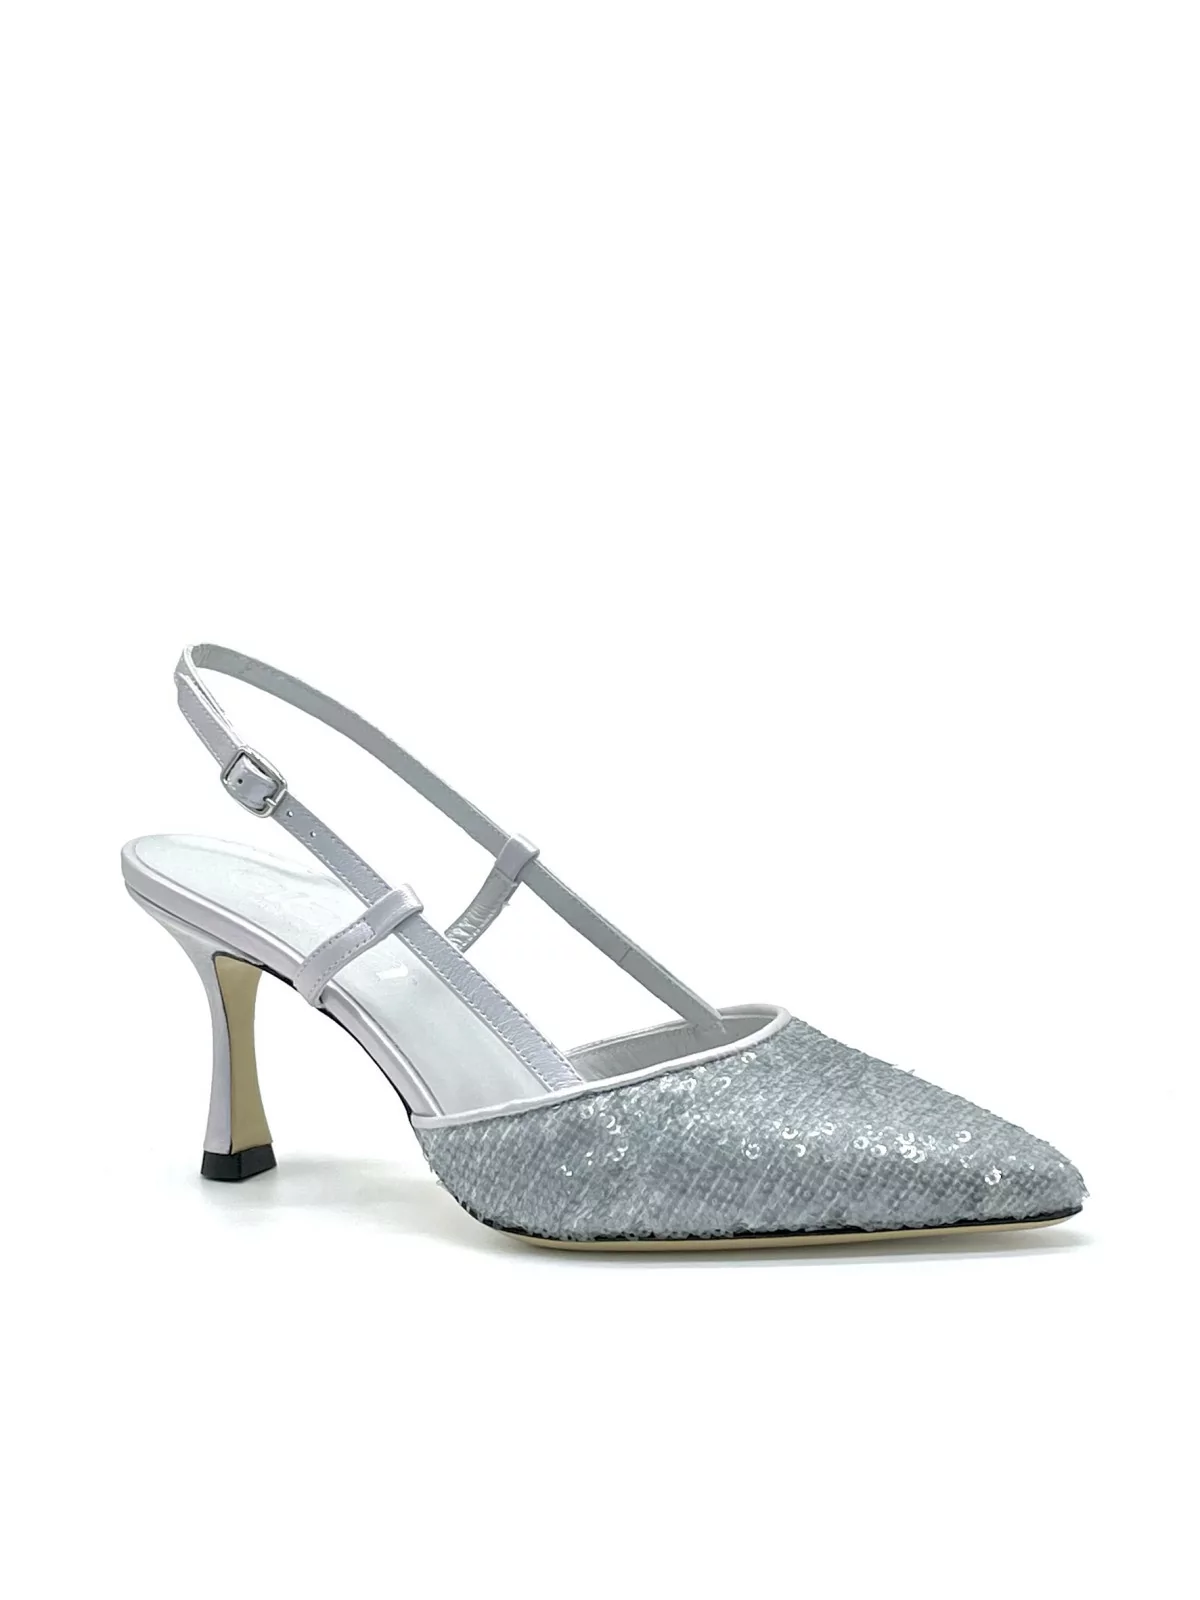 Silver laminate leather and paillettes fabric slingback. Leather lining, leather